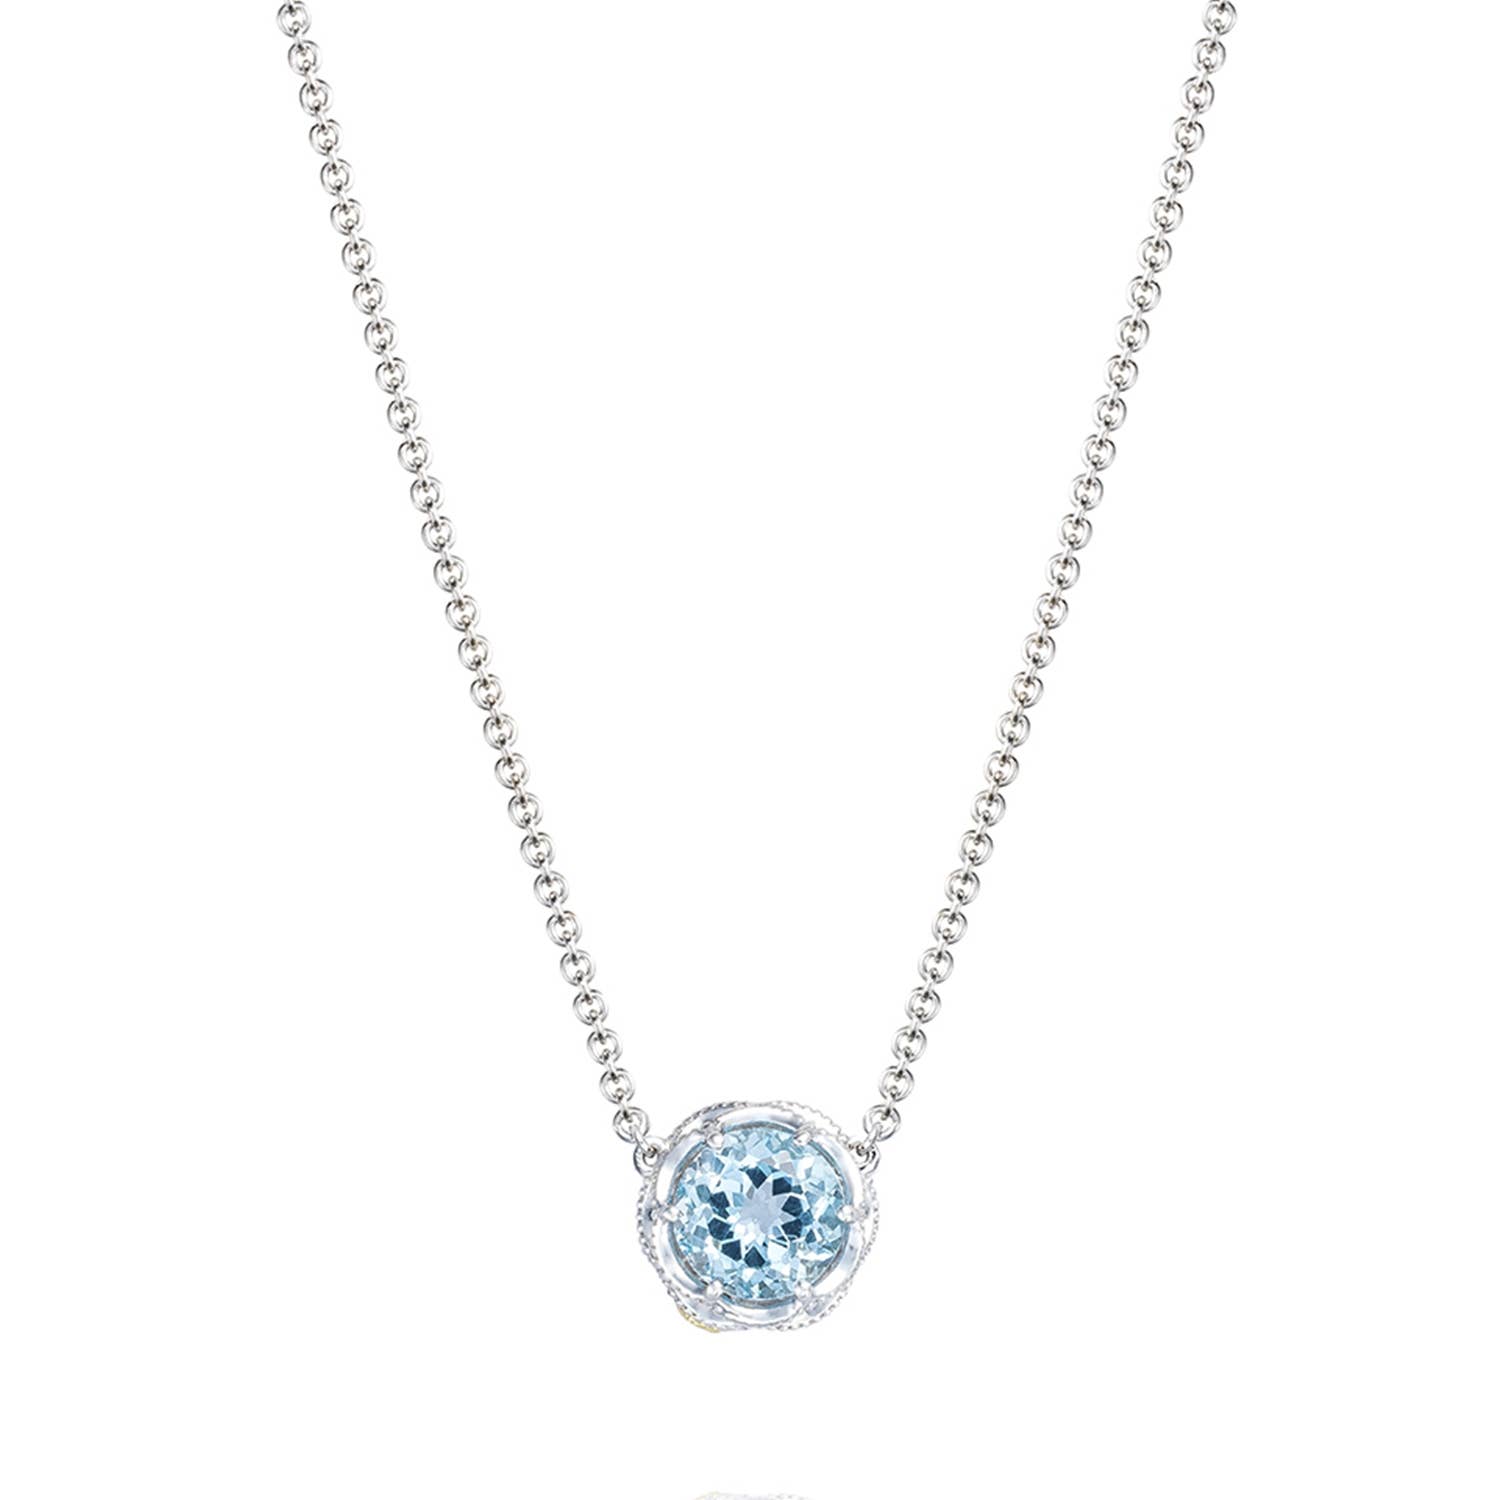 Crescent  Station Necklace featuring Sky Blue Topaz